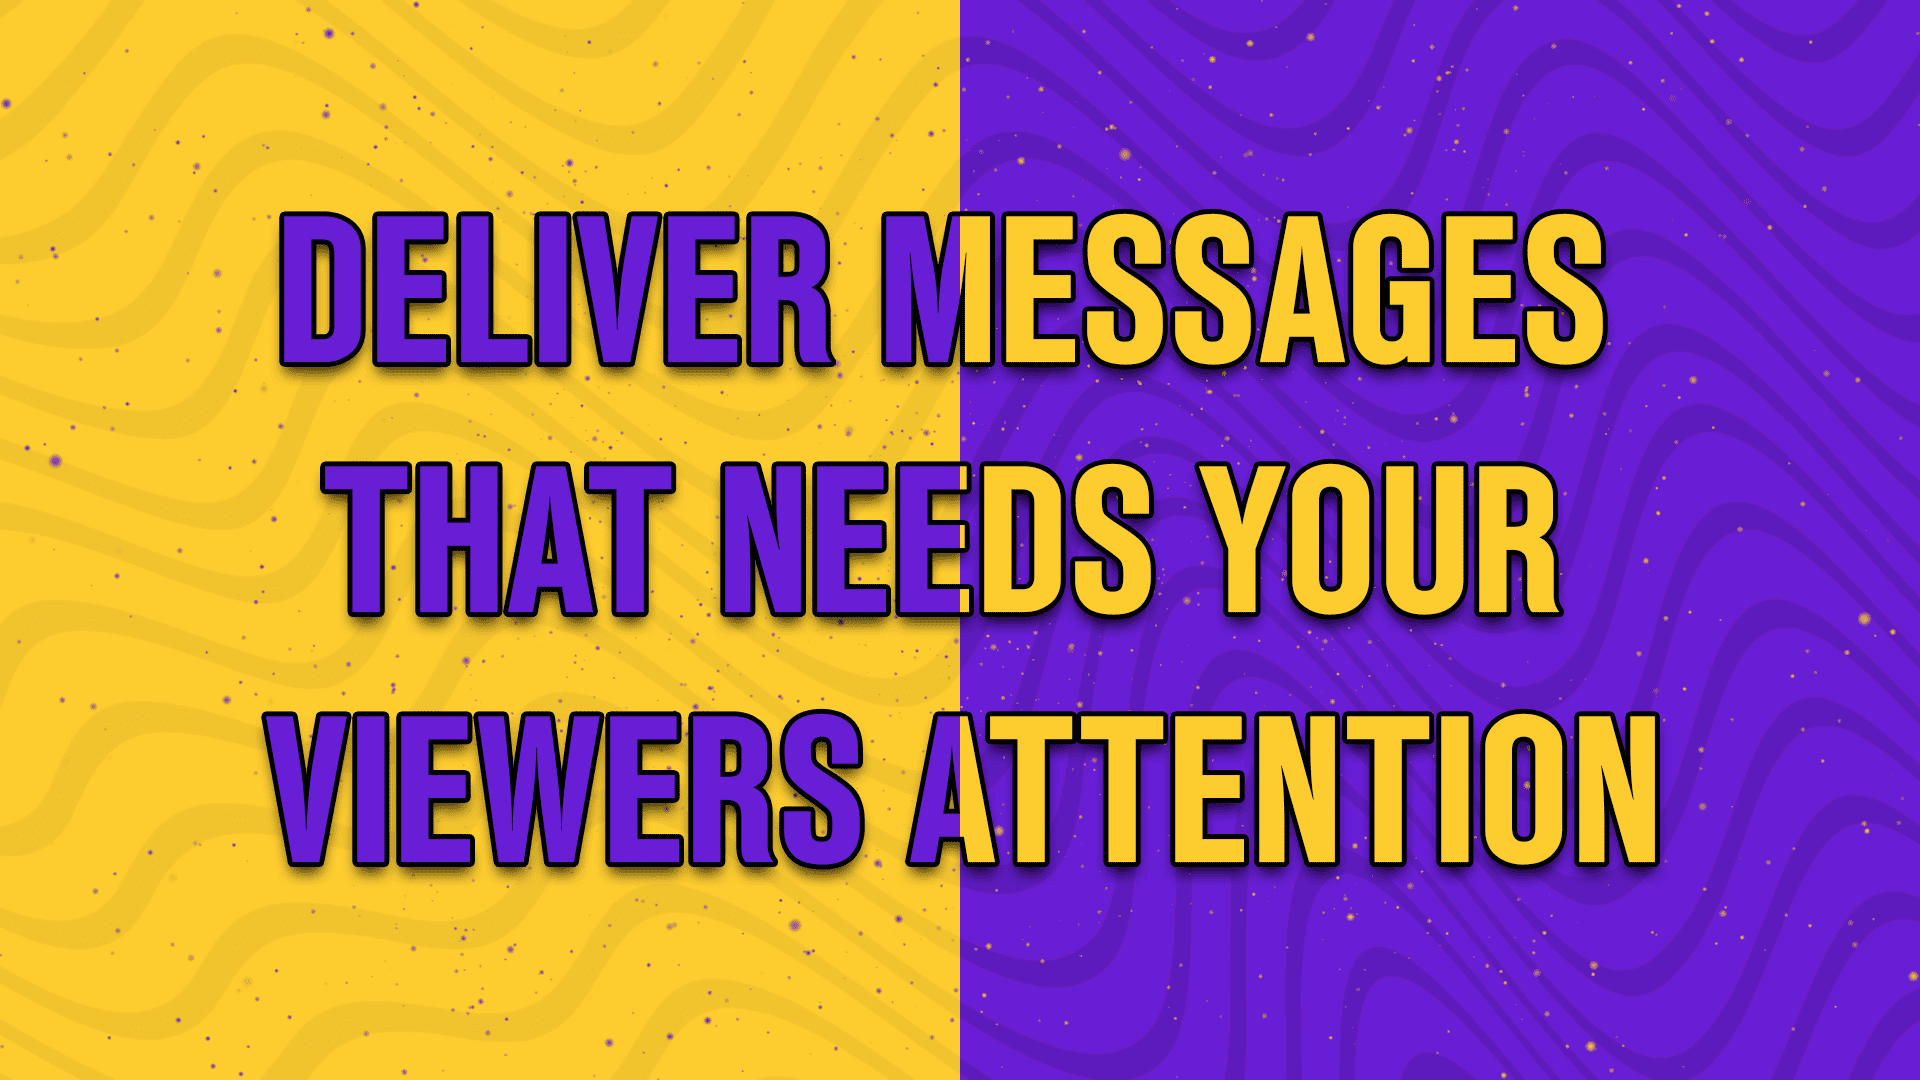 Deliver messages that needs your viewers attention - StreamBee